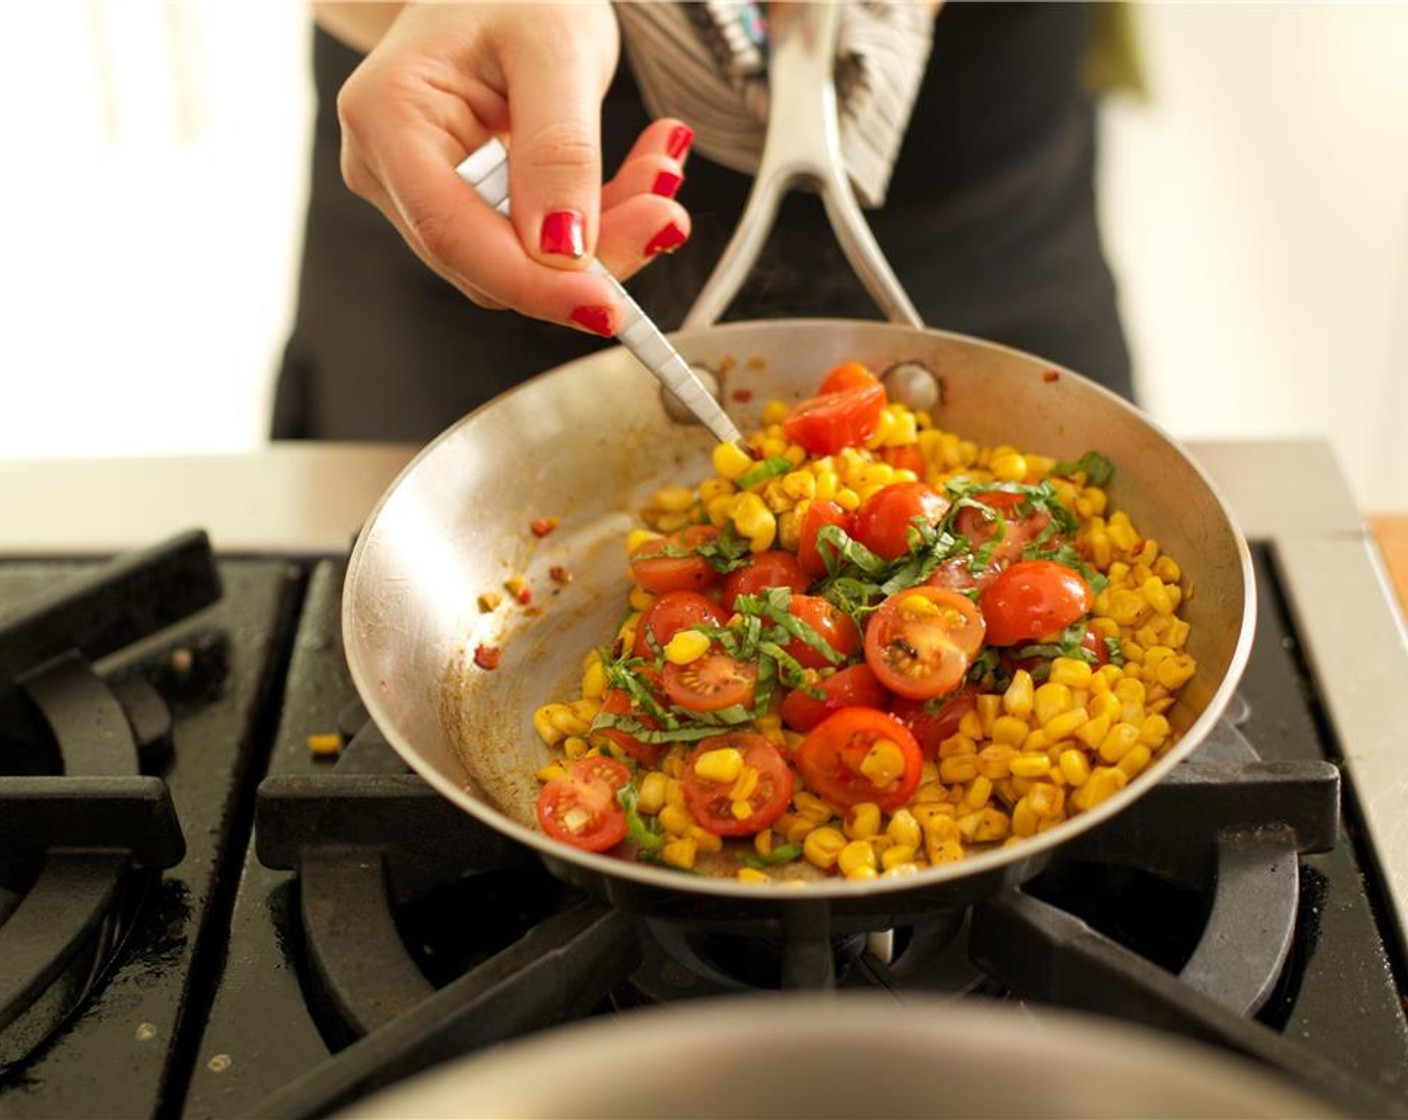 step 8 Over medium high heat, add Olive Oil (1 Tbsp) to a medium saute pan. When hot, add the corn mixture and saute for four minutes, stirring frequently. Remove from heat and add the cherry tomatoes and basil.